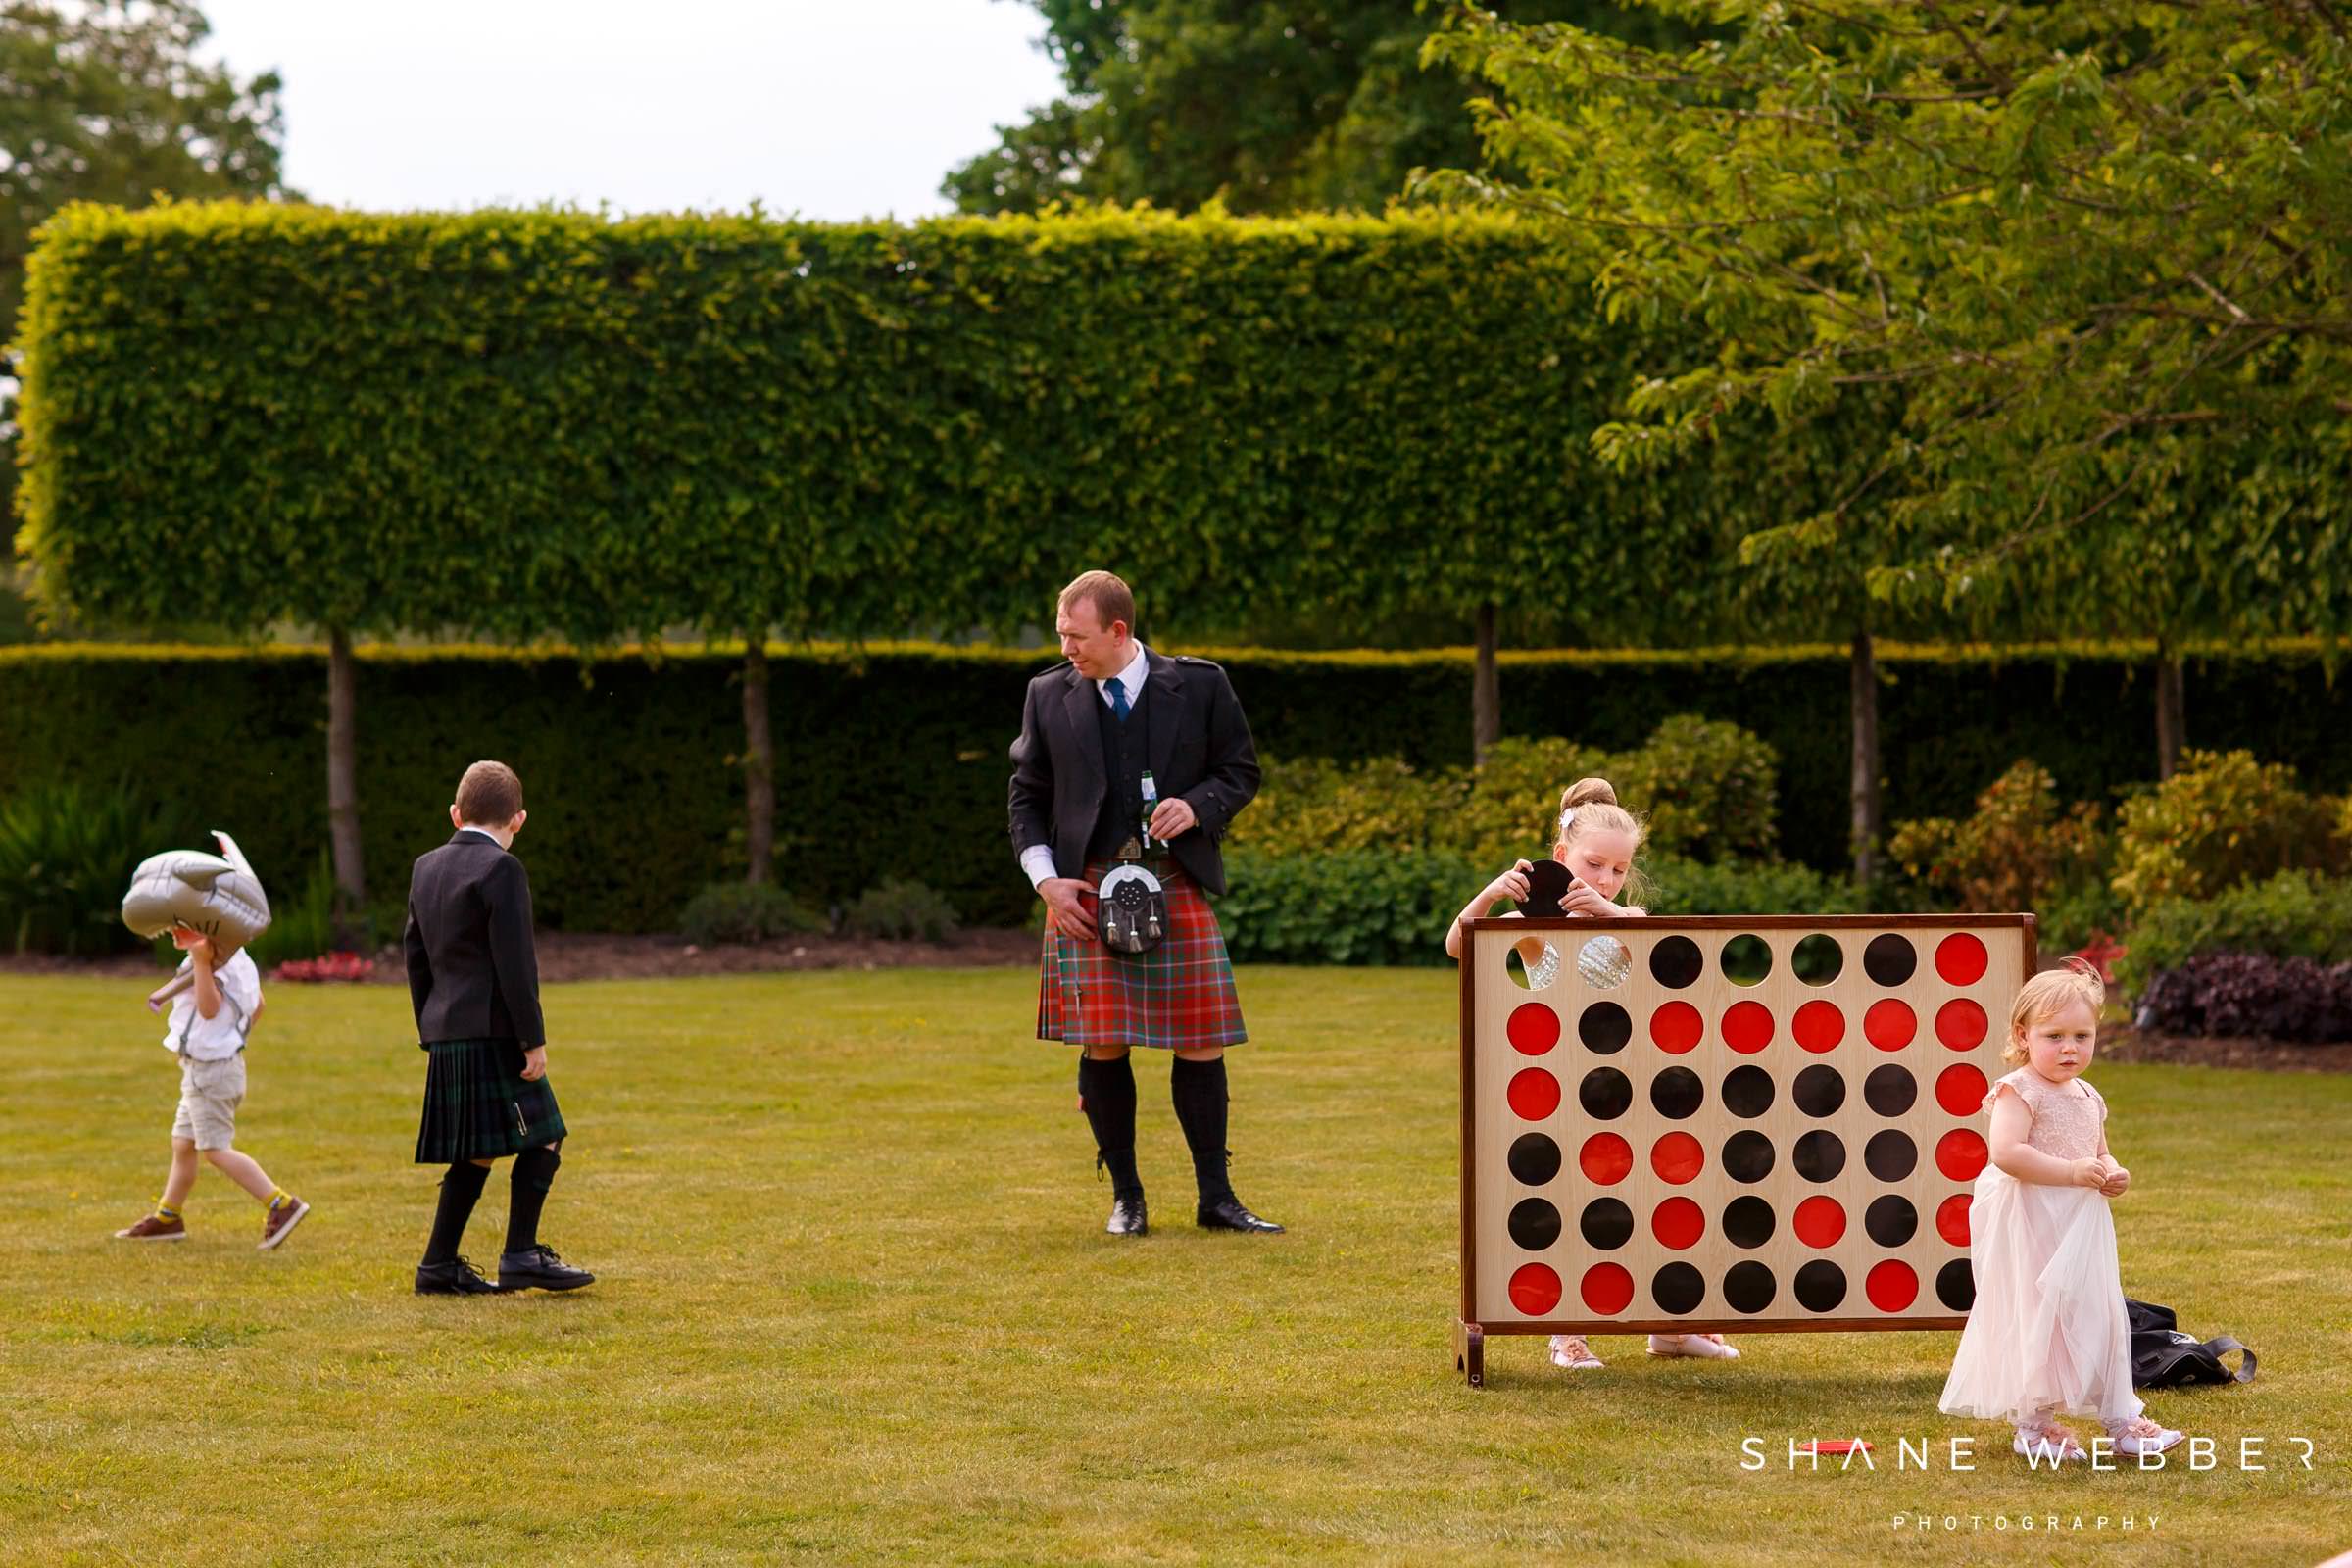 giant connect 4 wedding games